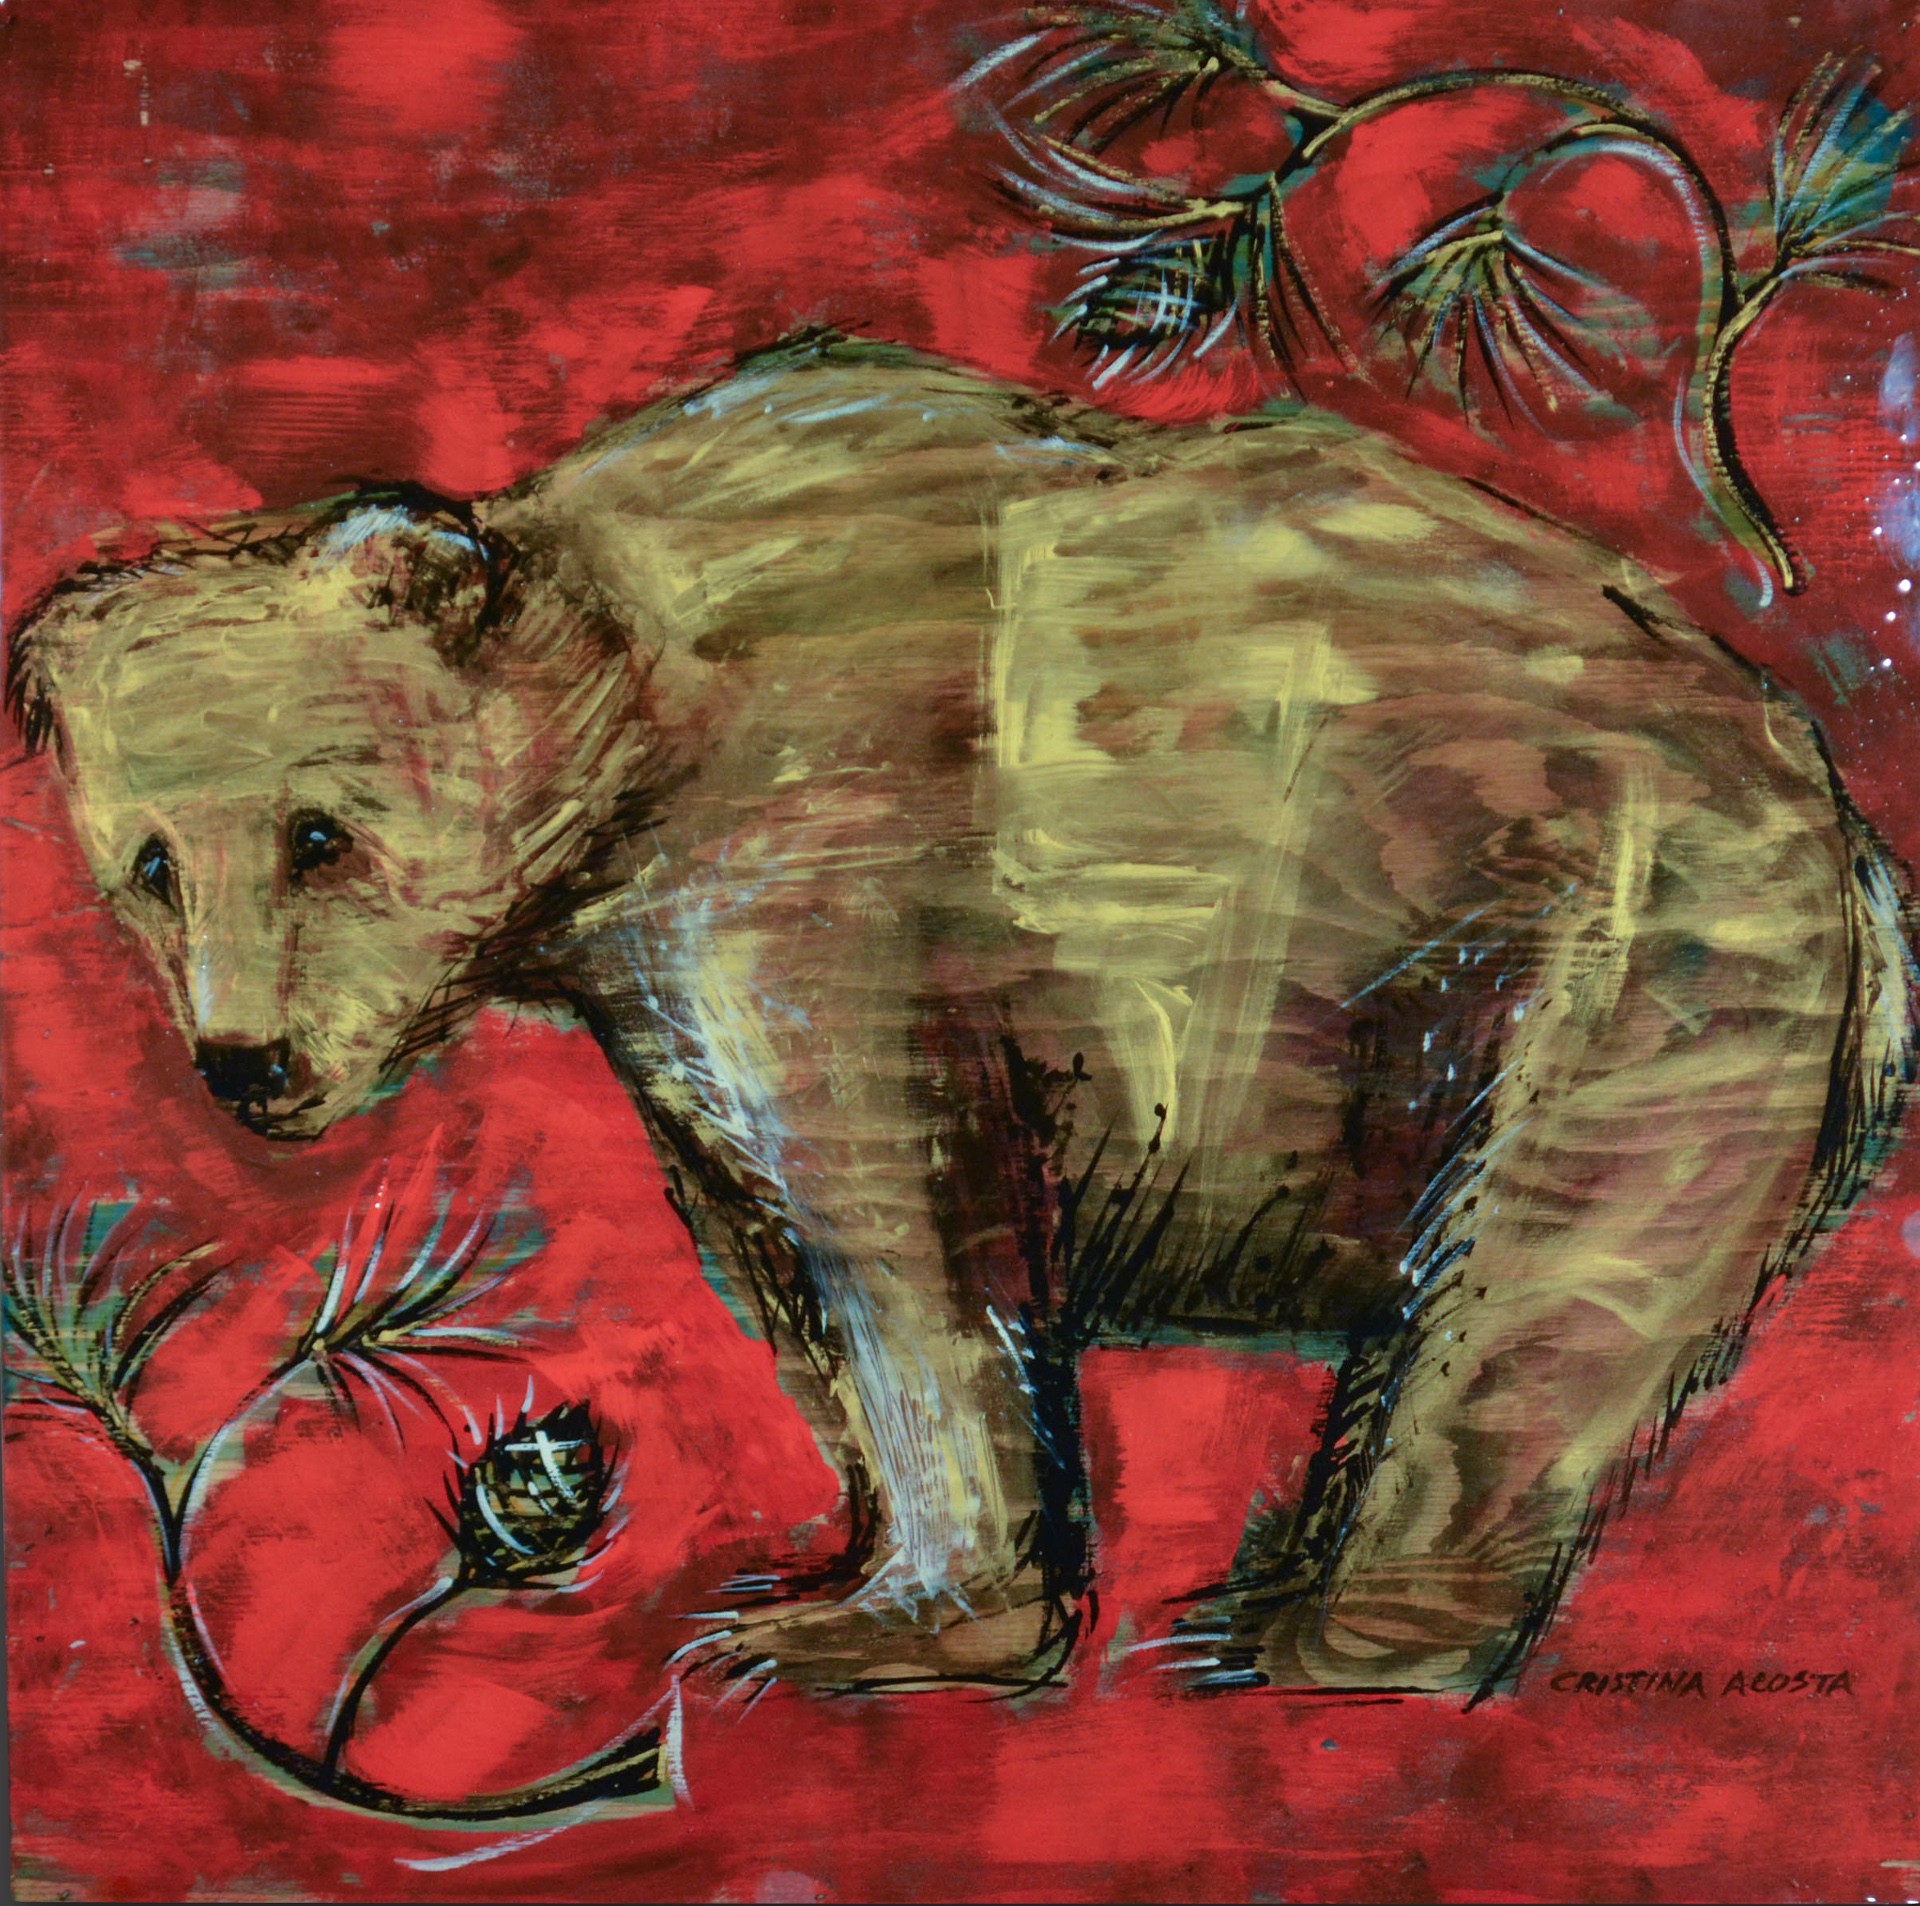 Woodland Bear on Red by Cristina Acosta